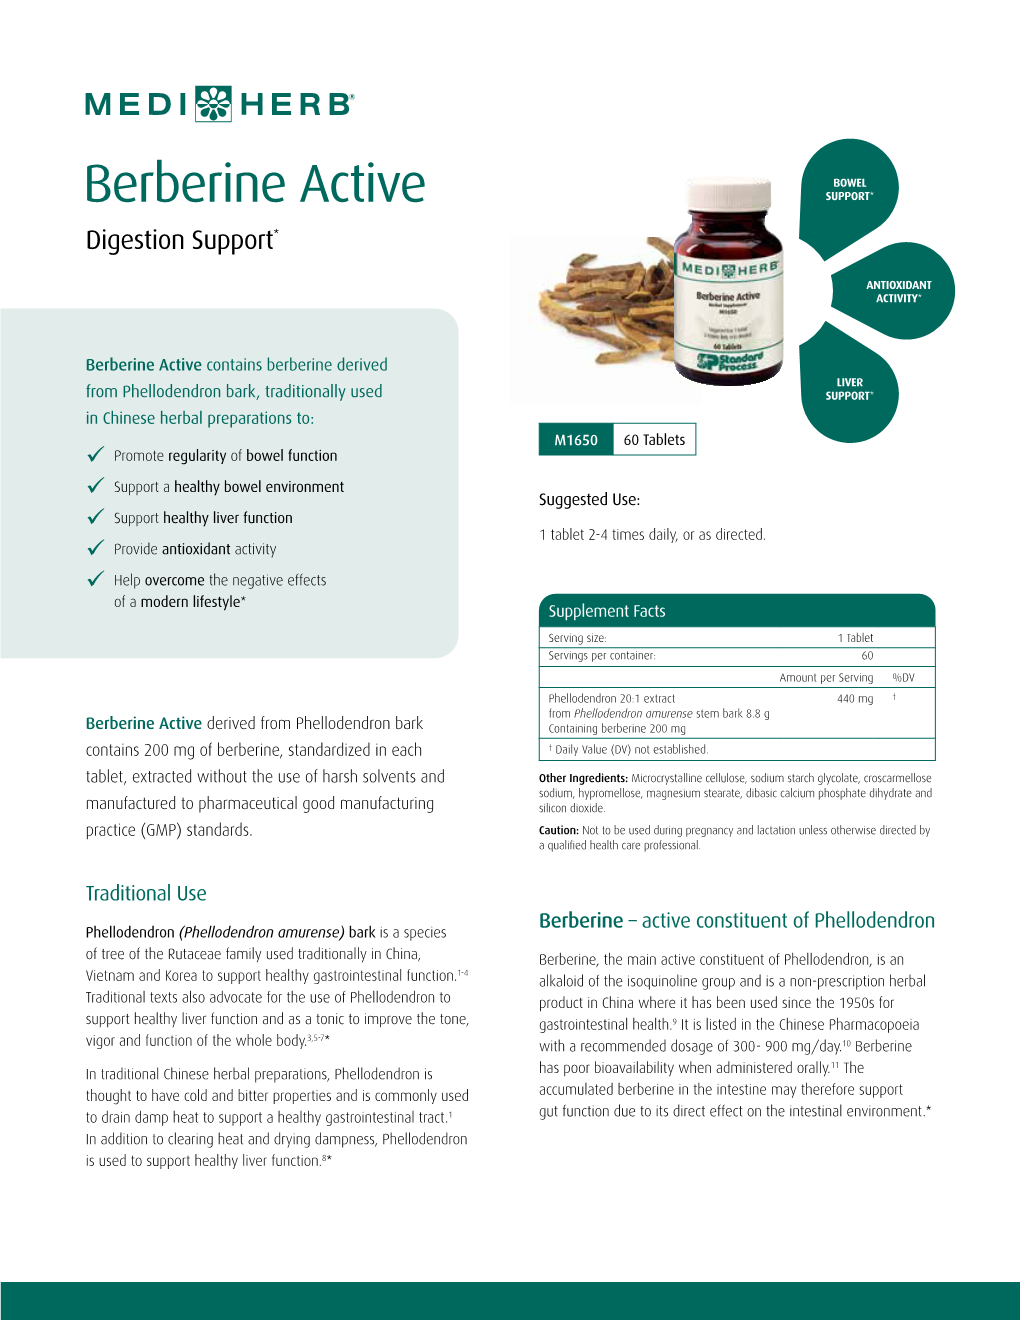 Berberine Active SUPPORT* Digestion Support*